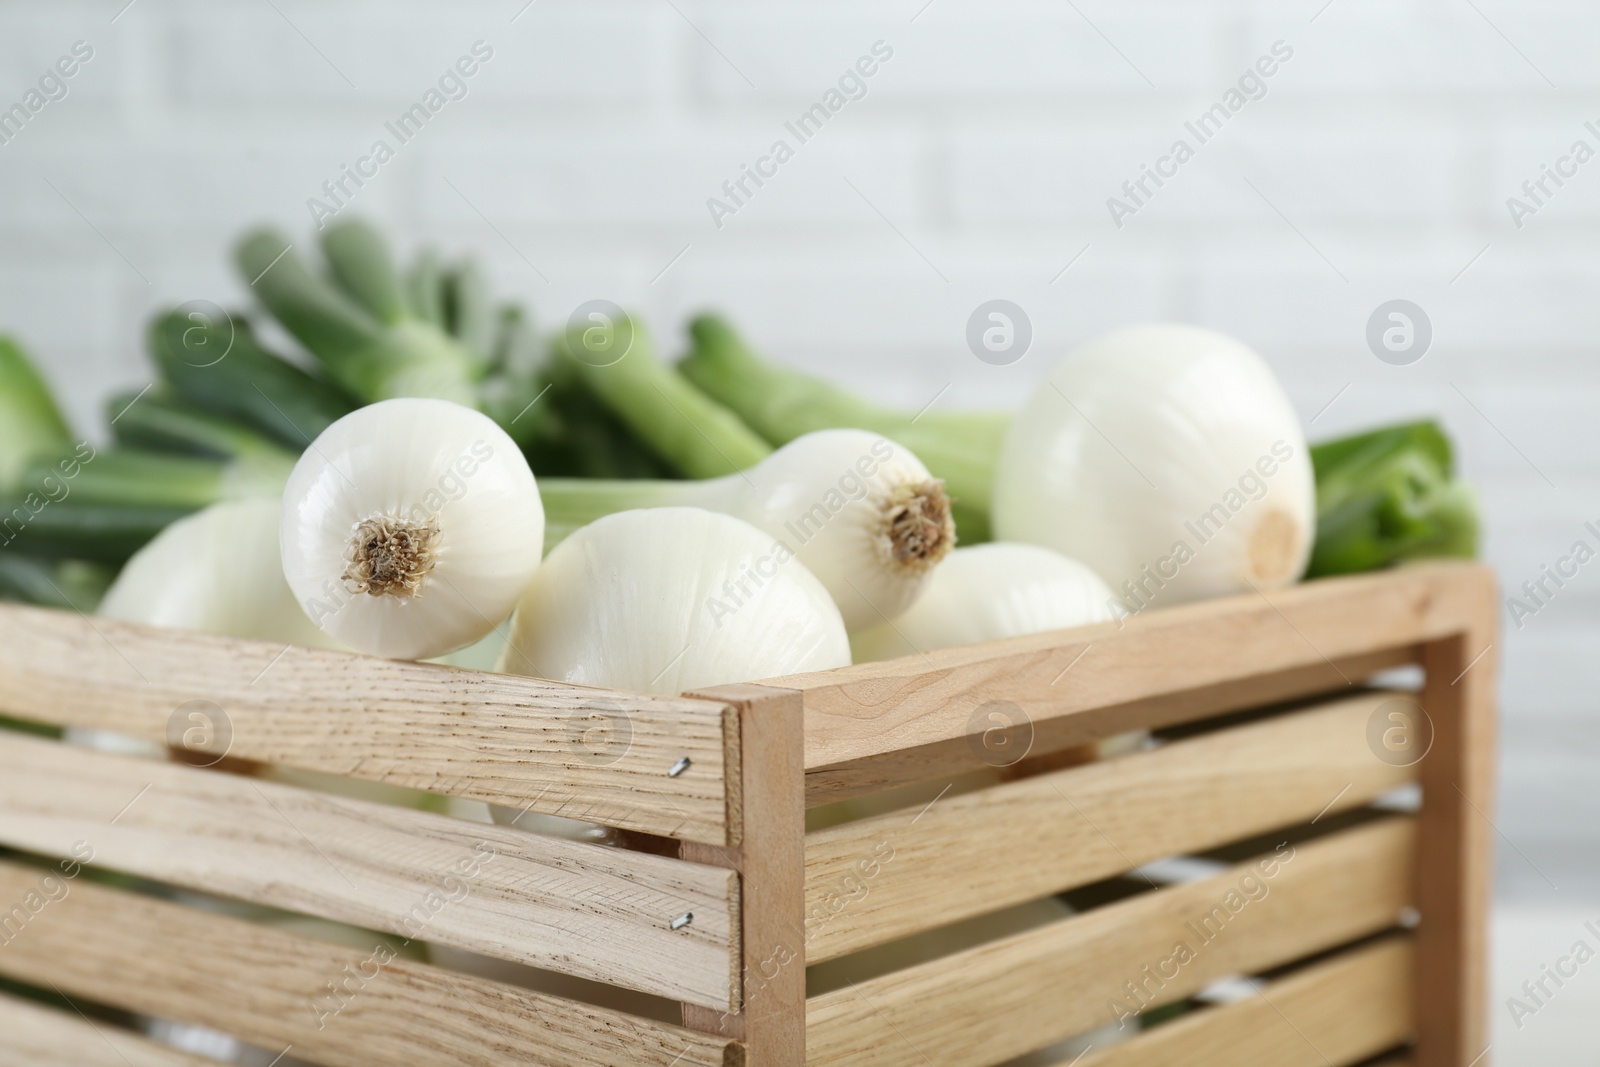 Photo of Crate with green spring onions, closeup view